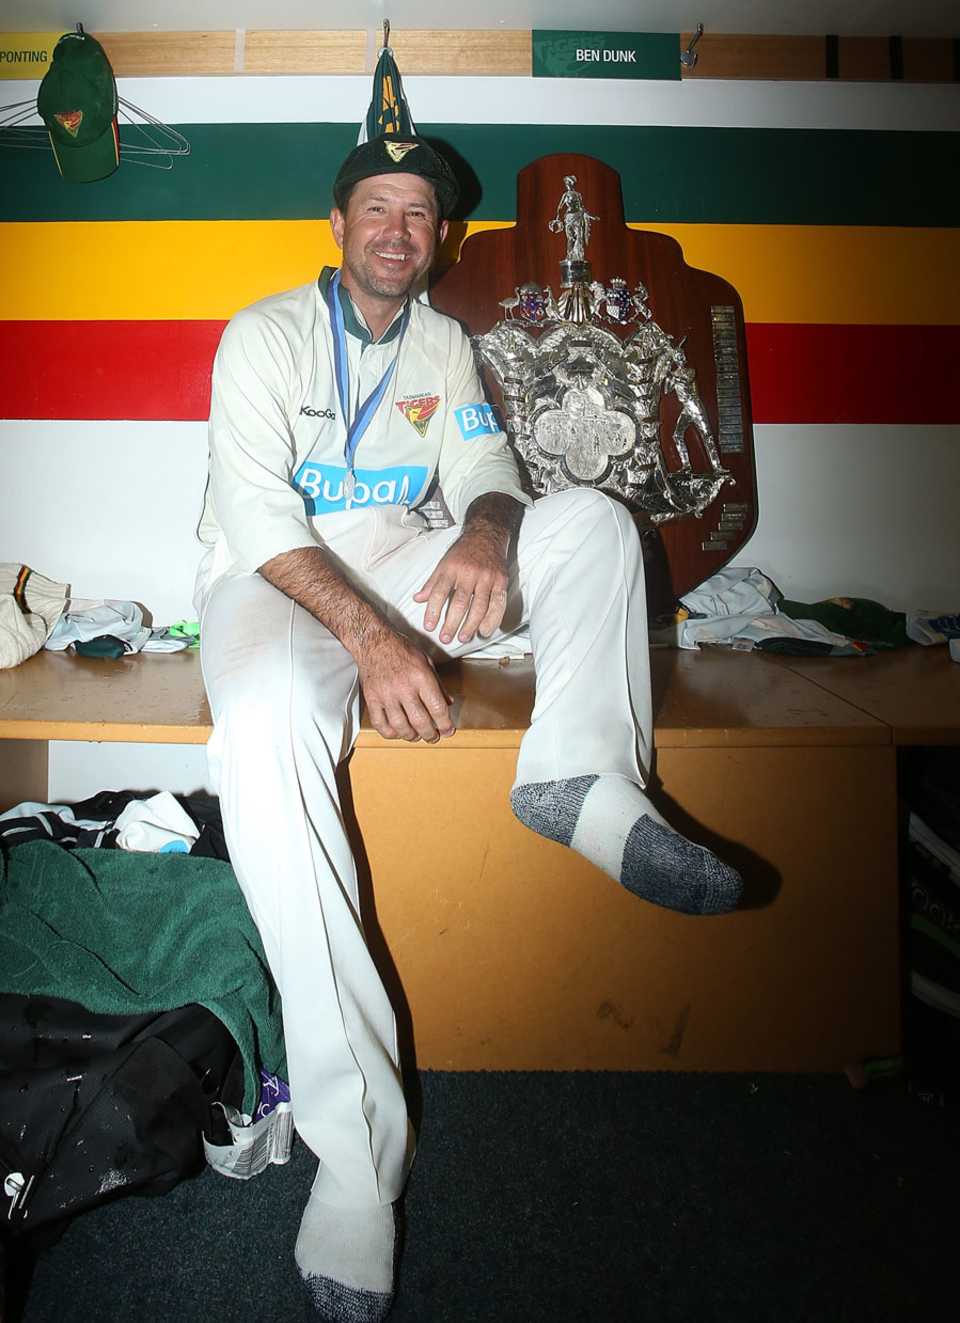 Ricky Ponting with the Sheffield Shield